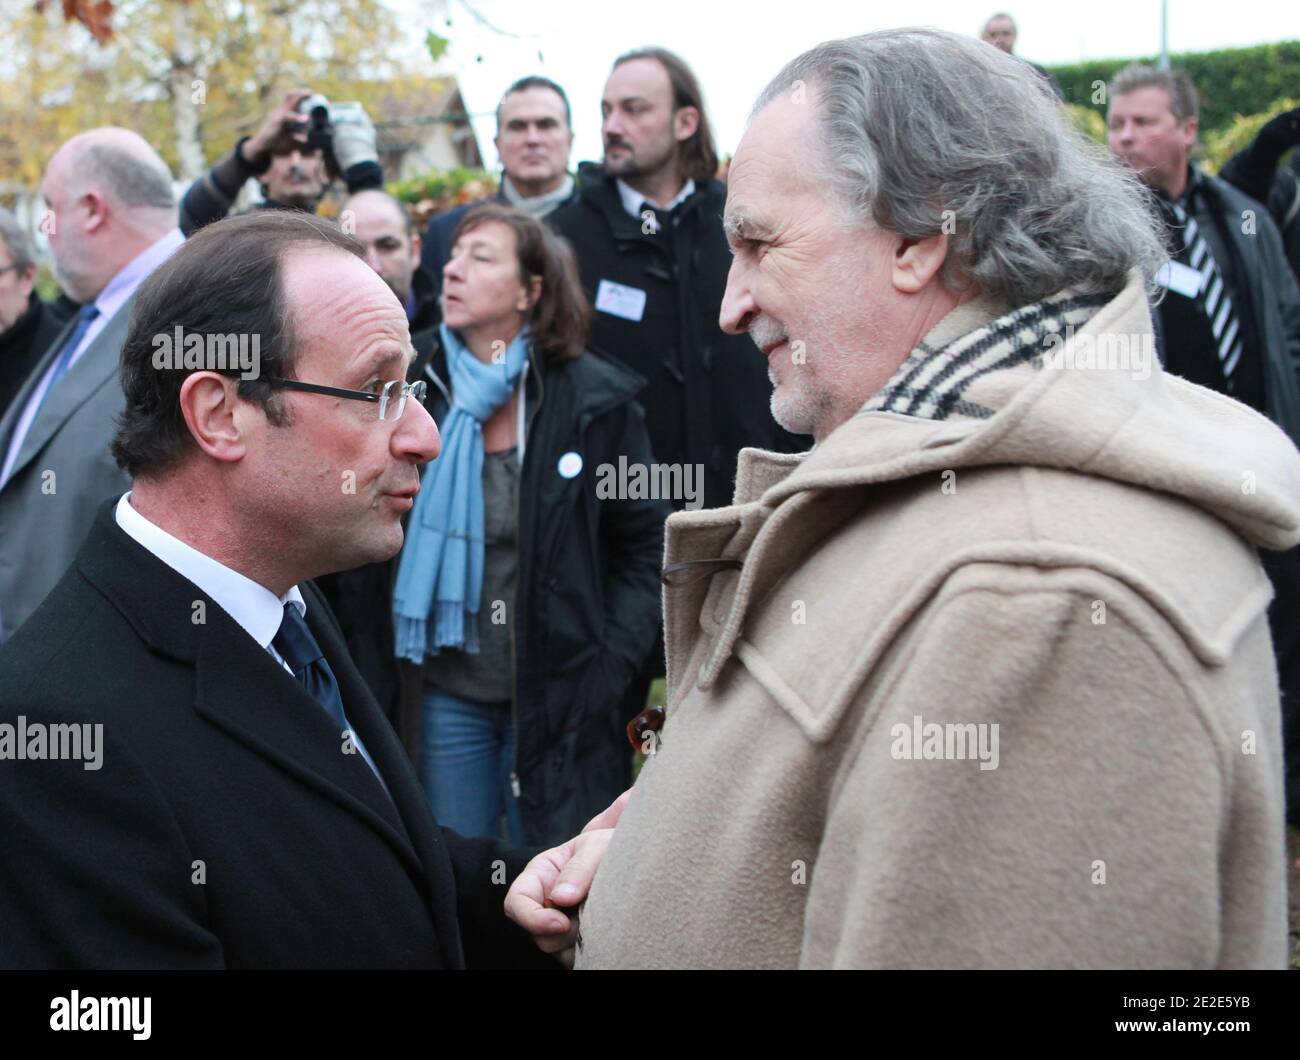 Francois Hollande and Jean-Christophe Mitterrand attending the funeral of Danielle Mitterrand on November 26, 2011 in Cluny, France. Danielle Mitterrand, First lady of France between 1981 and 1995 and human rights campaigner died in Paris on November 22, 2011. Photo by Vincent Dargent/ABACAPRESS.COM Stock Photo